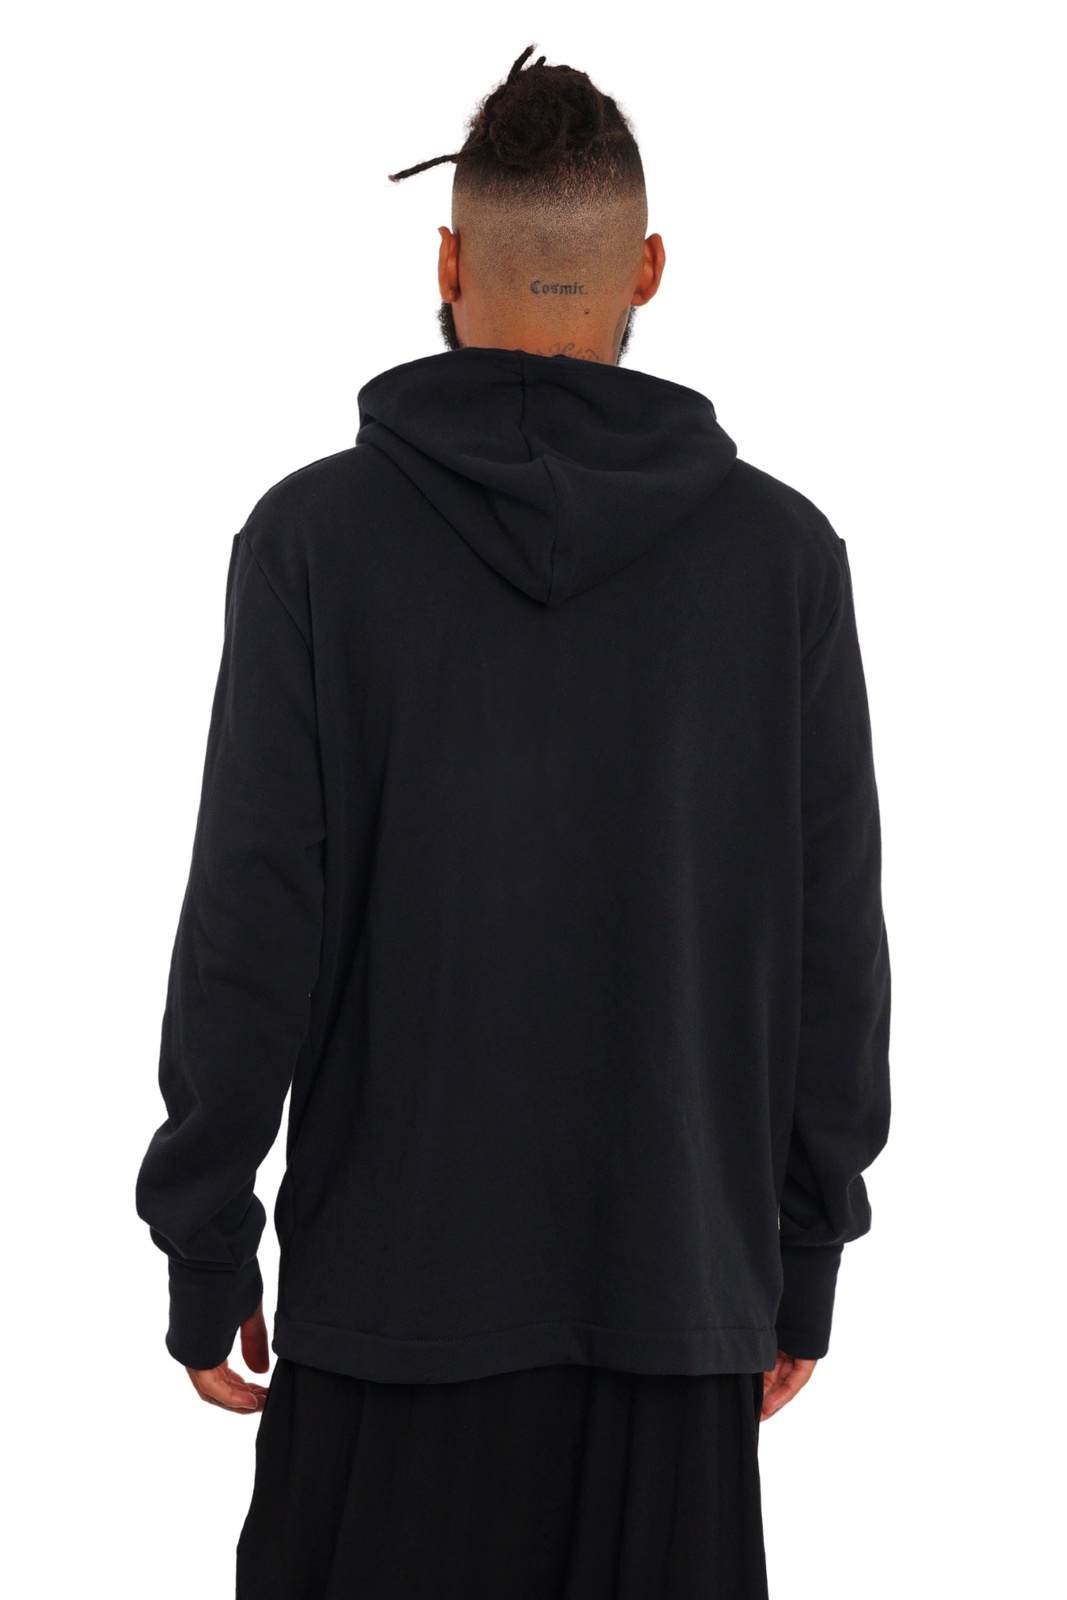 Mens High Neck Hoodie in black organic cotton from Ekoluxe.